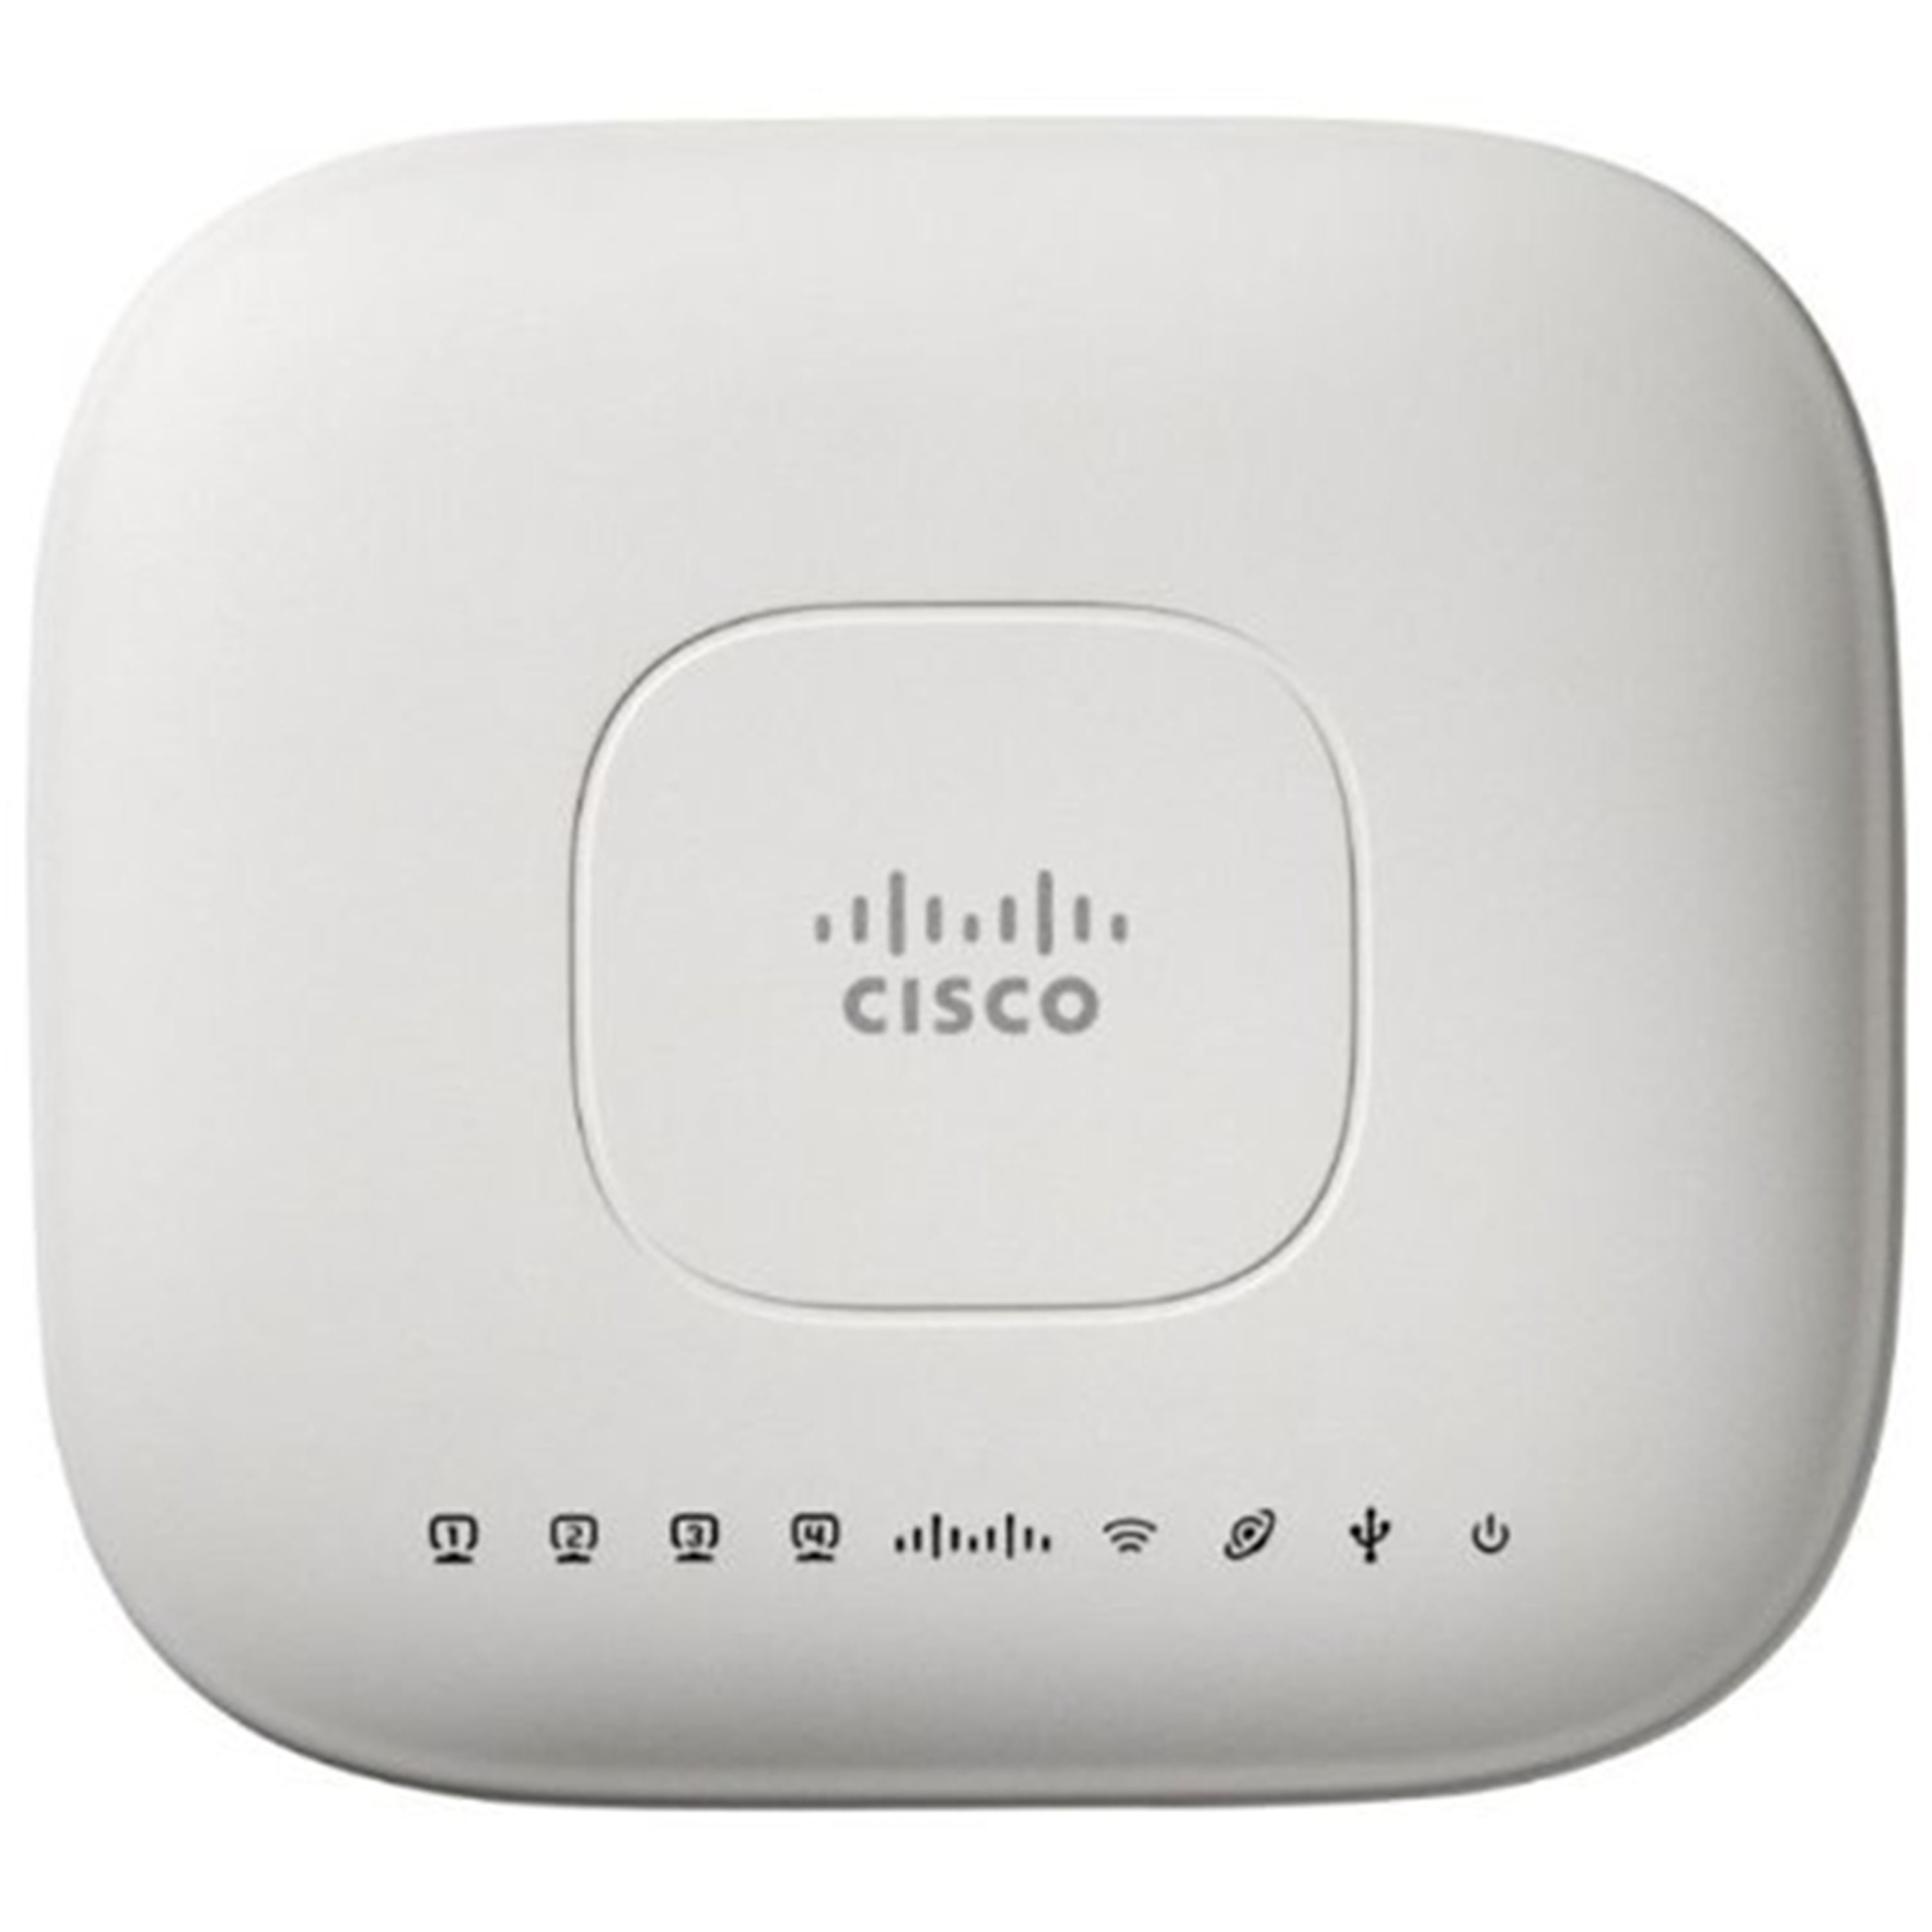 Cisco  Wireless 802.11ac AIR-AP1832I-B-K9 New REPLACEMENT FOR AIR-CAP1702I-A-K9 